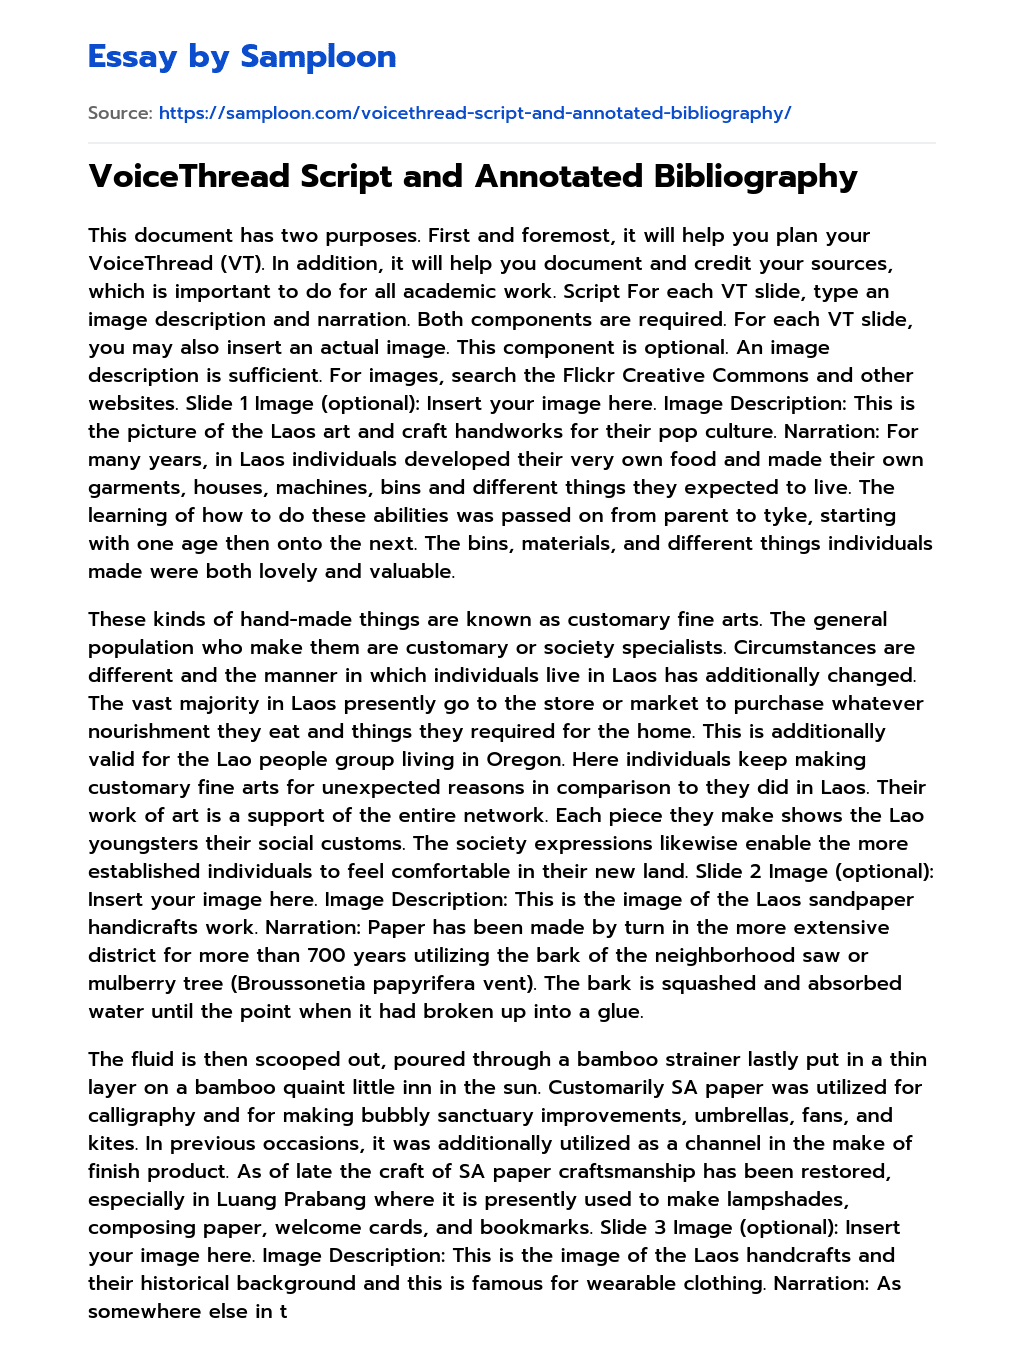 VoiceThread Script and Annotated Bibliography essay